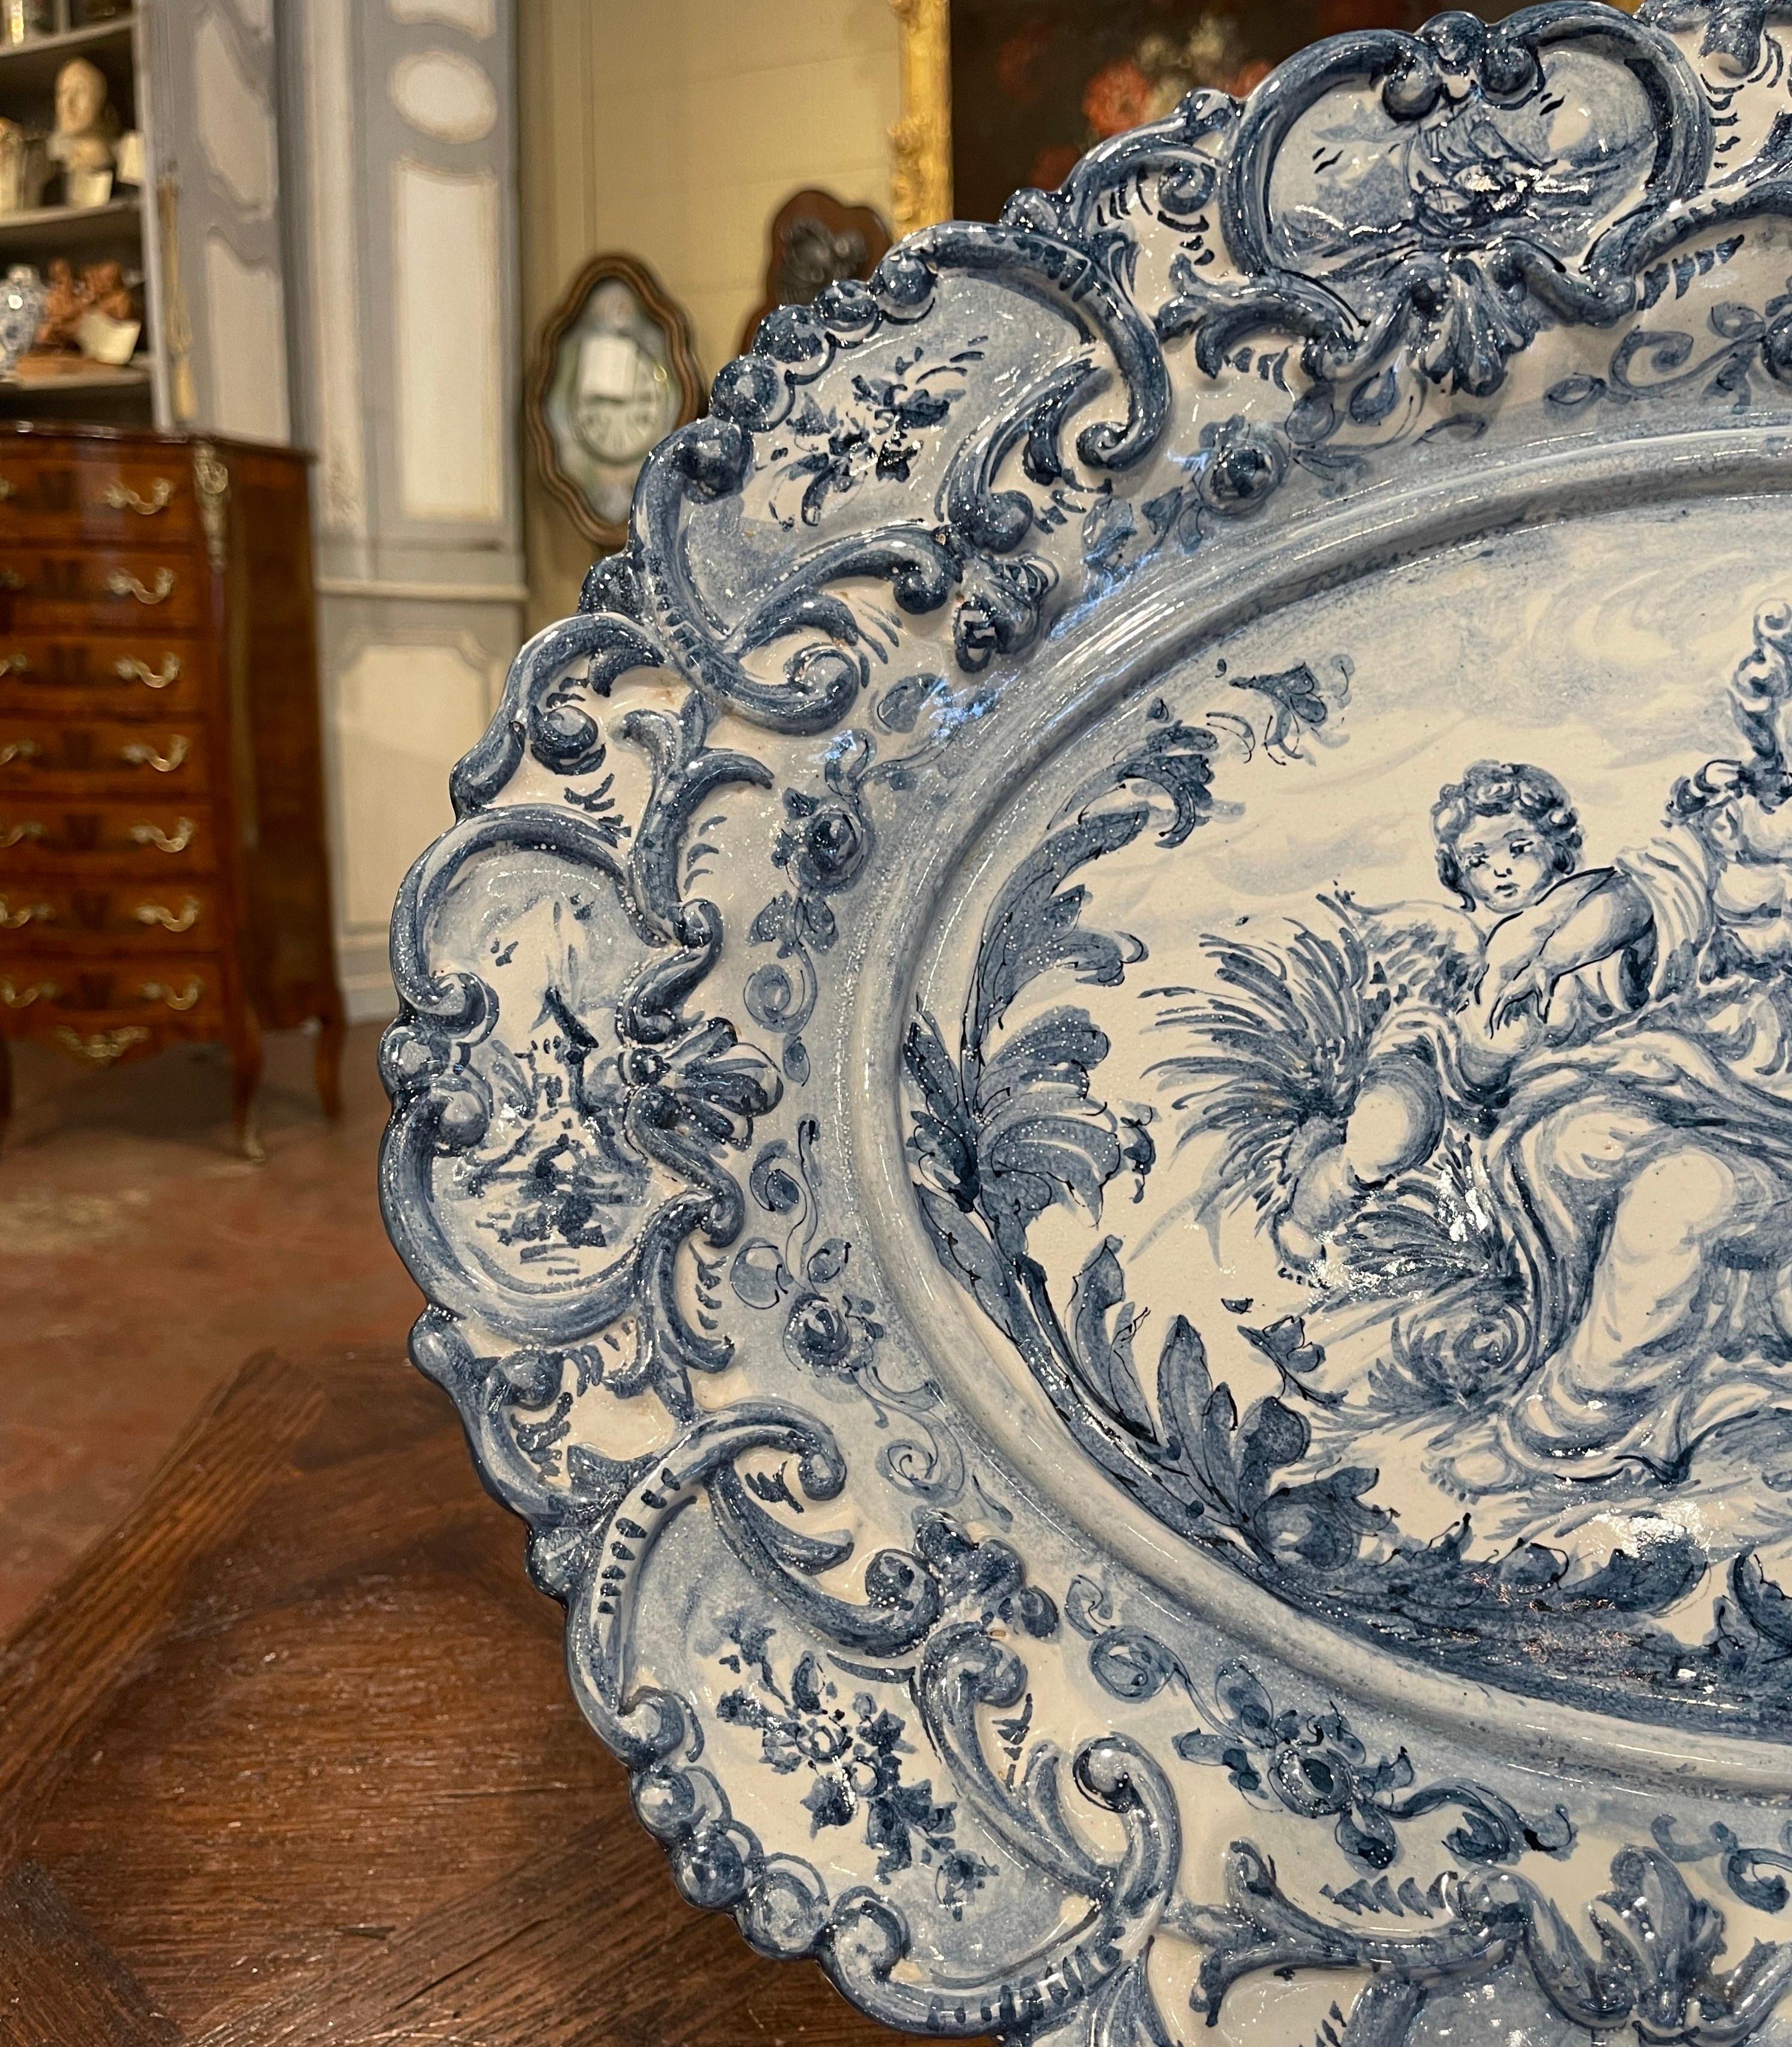 This large antique oval charger was crafted in Italy, circa 1960. The large ceramic wall hanging plate depicts a neoclassical outdoor scene with a young beauty and two cherubs at her side. The border in high relief is further embellished with floral